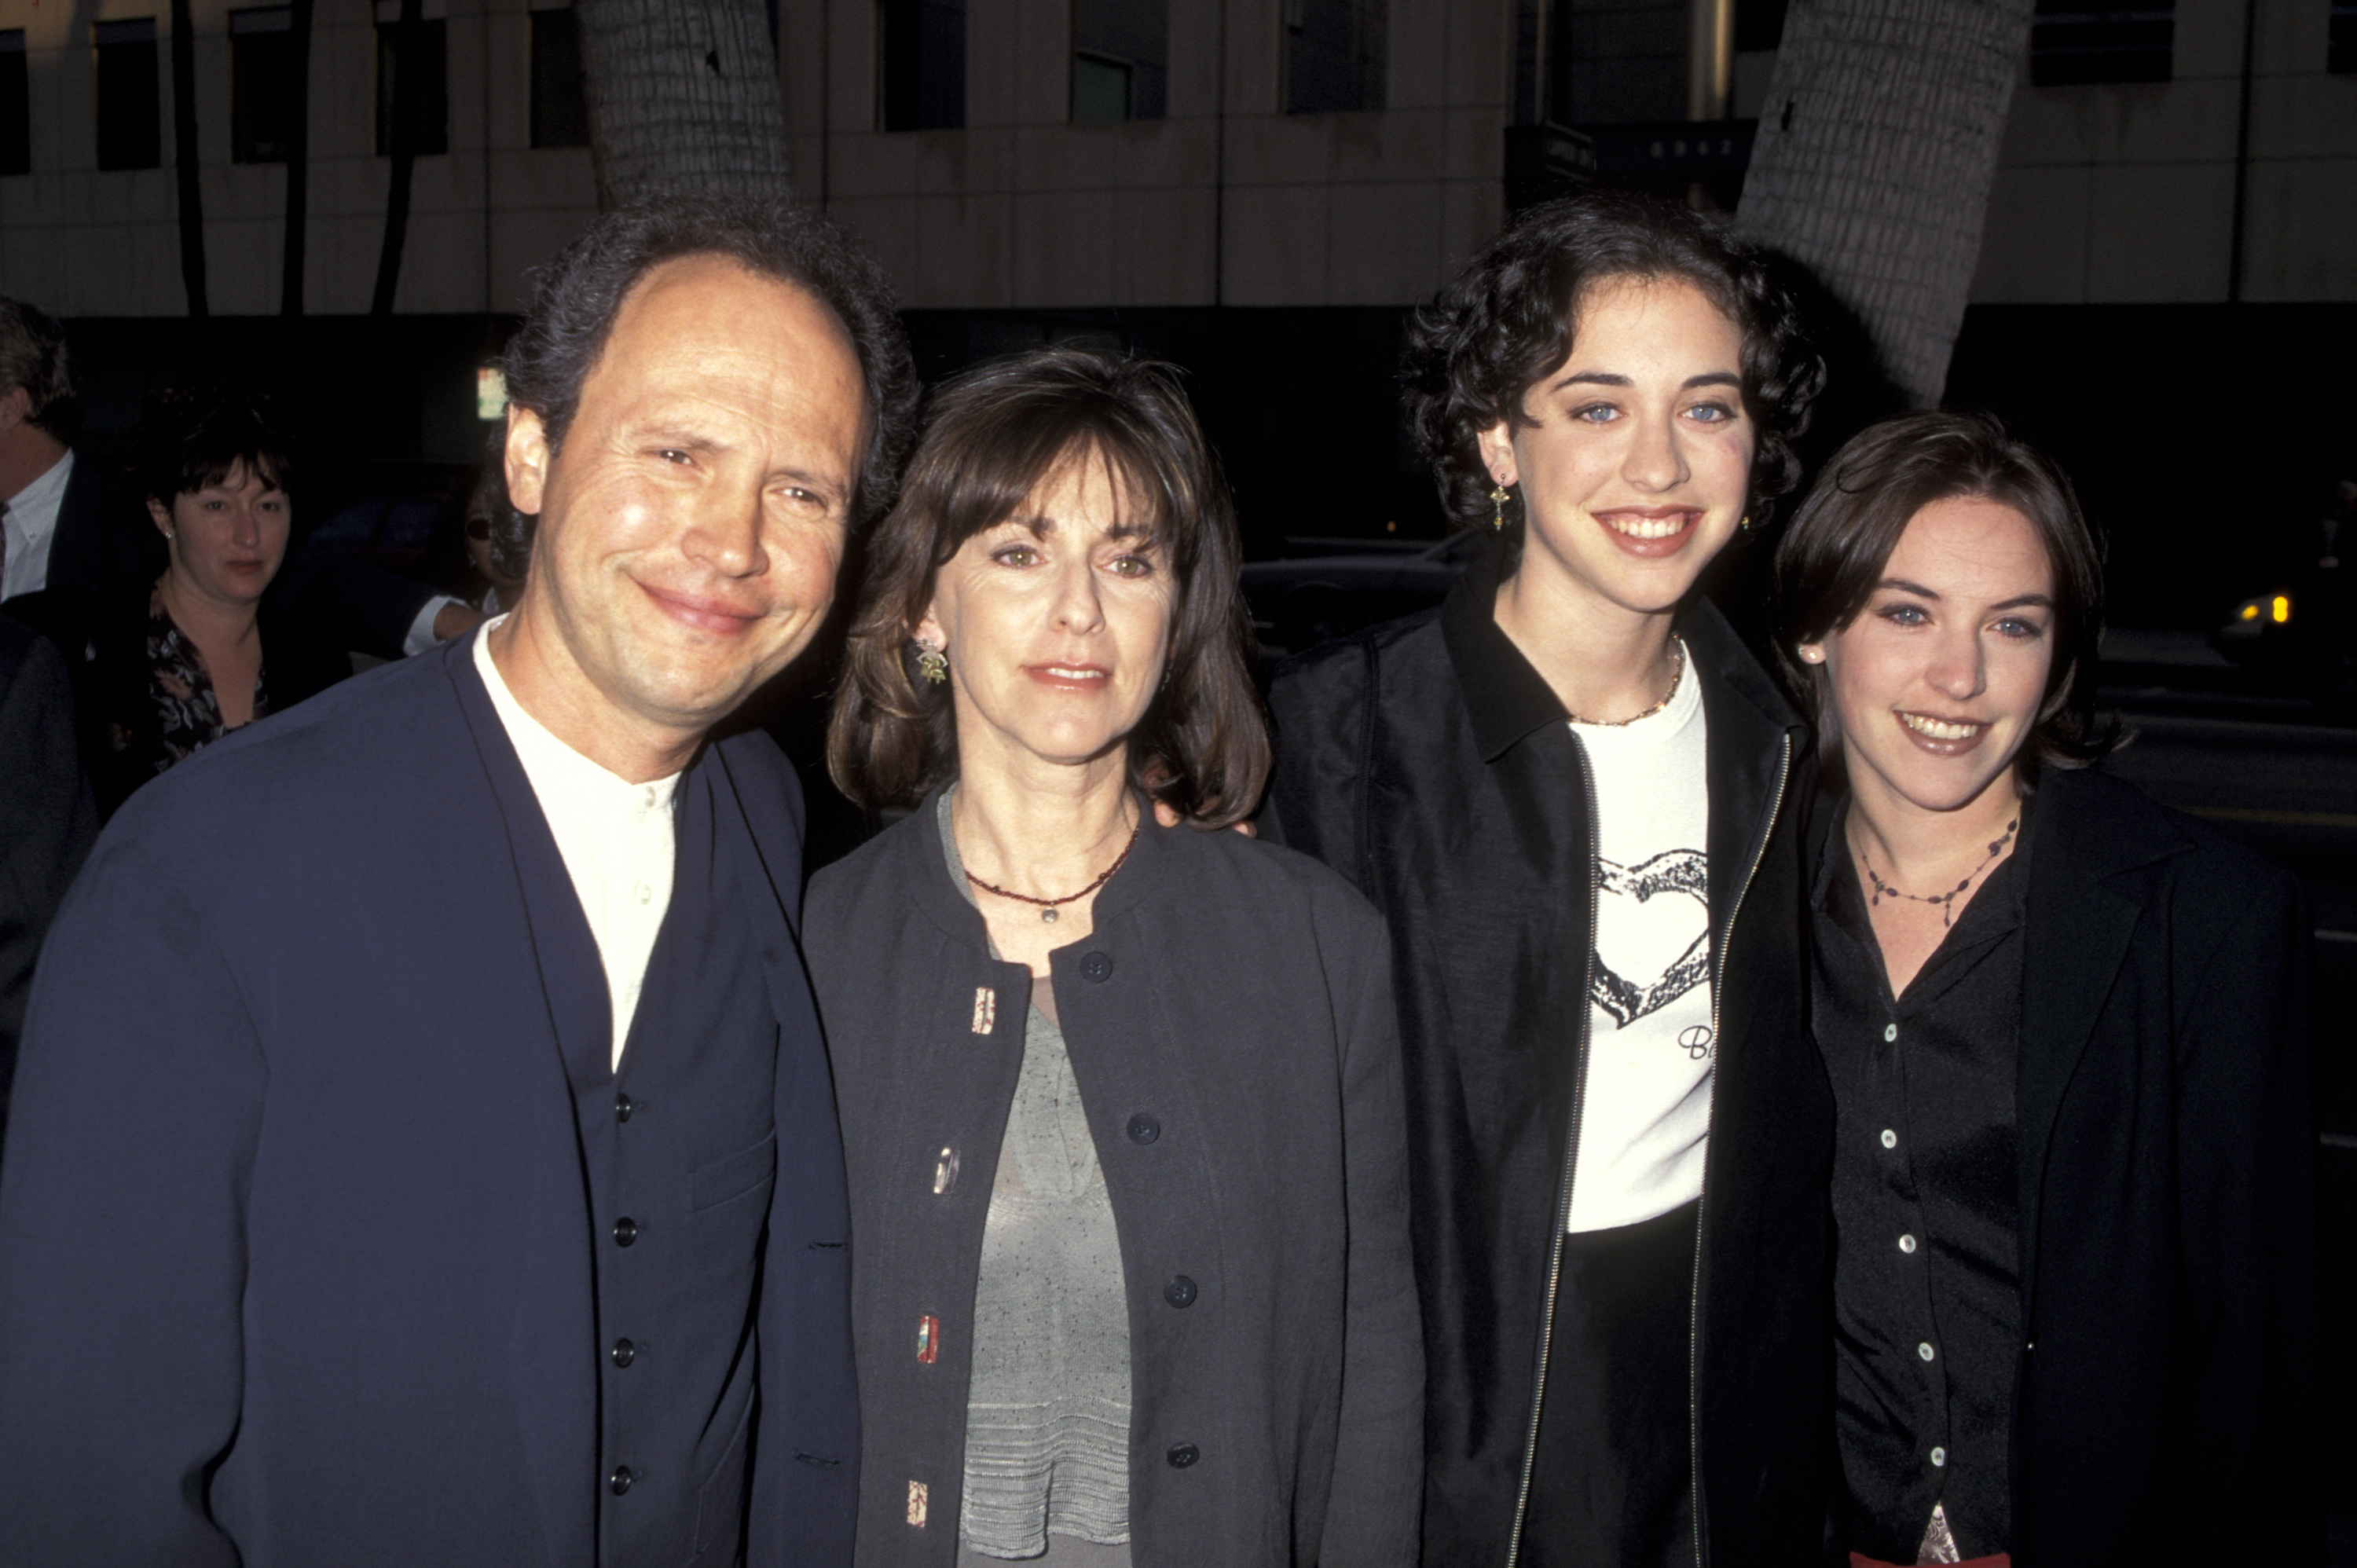 Billy Crystal, Wife Janice Crystal, and Daughters Lindsay Crystal and Jennifer Crystal at the "Forget Paris" Los Angeles Premiere on May 15, 1995. | Source: Getty Images